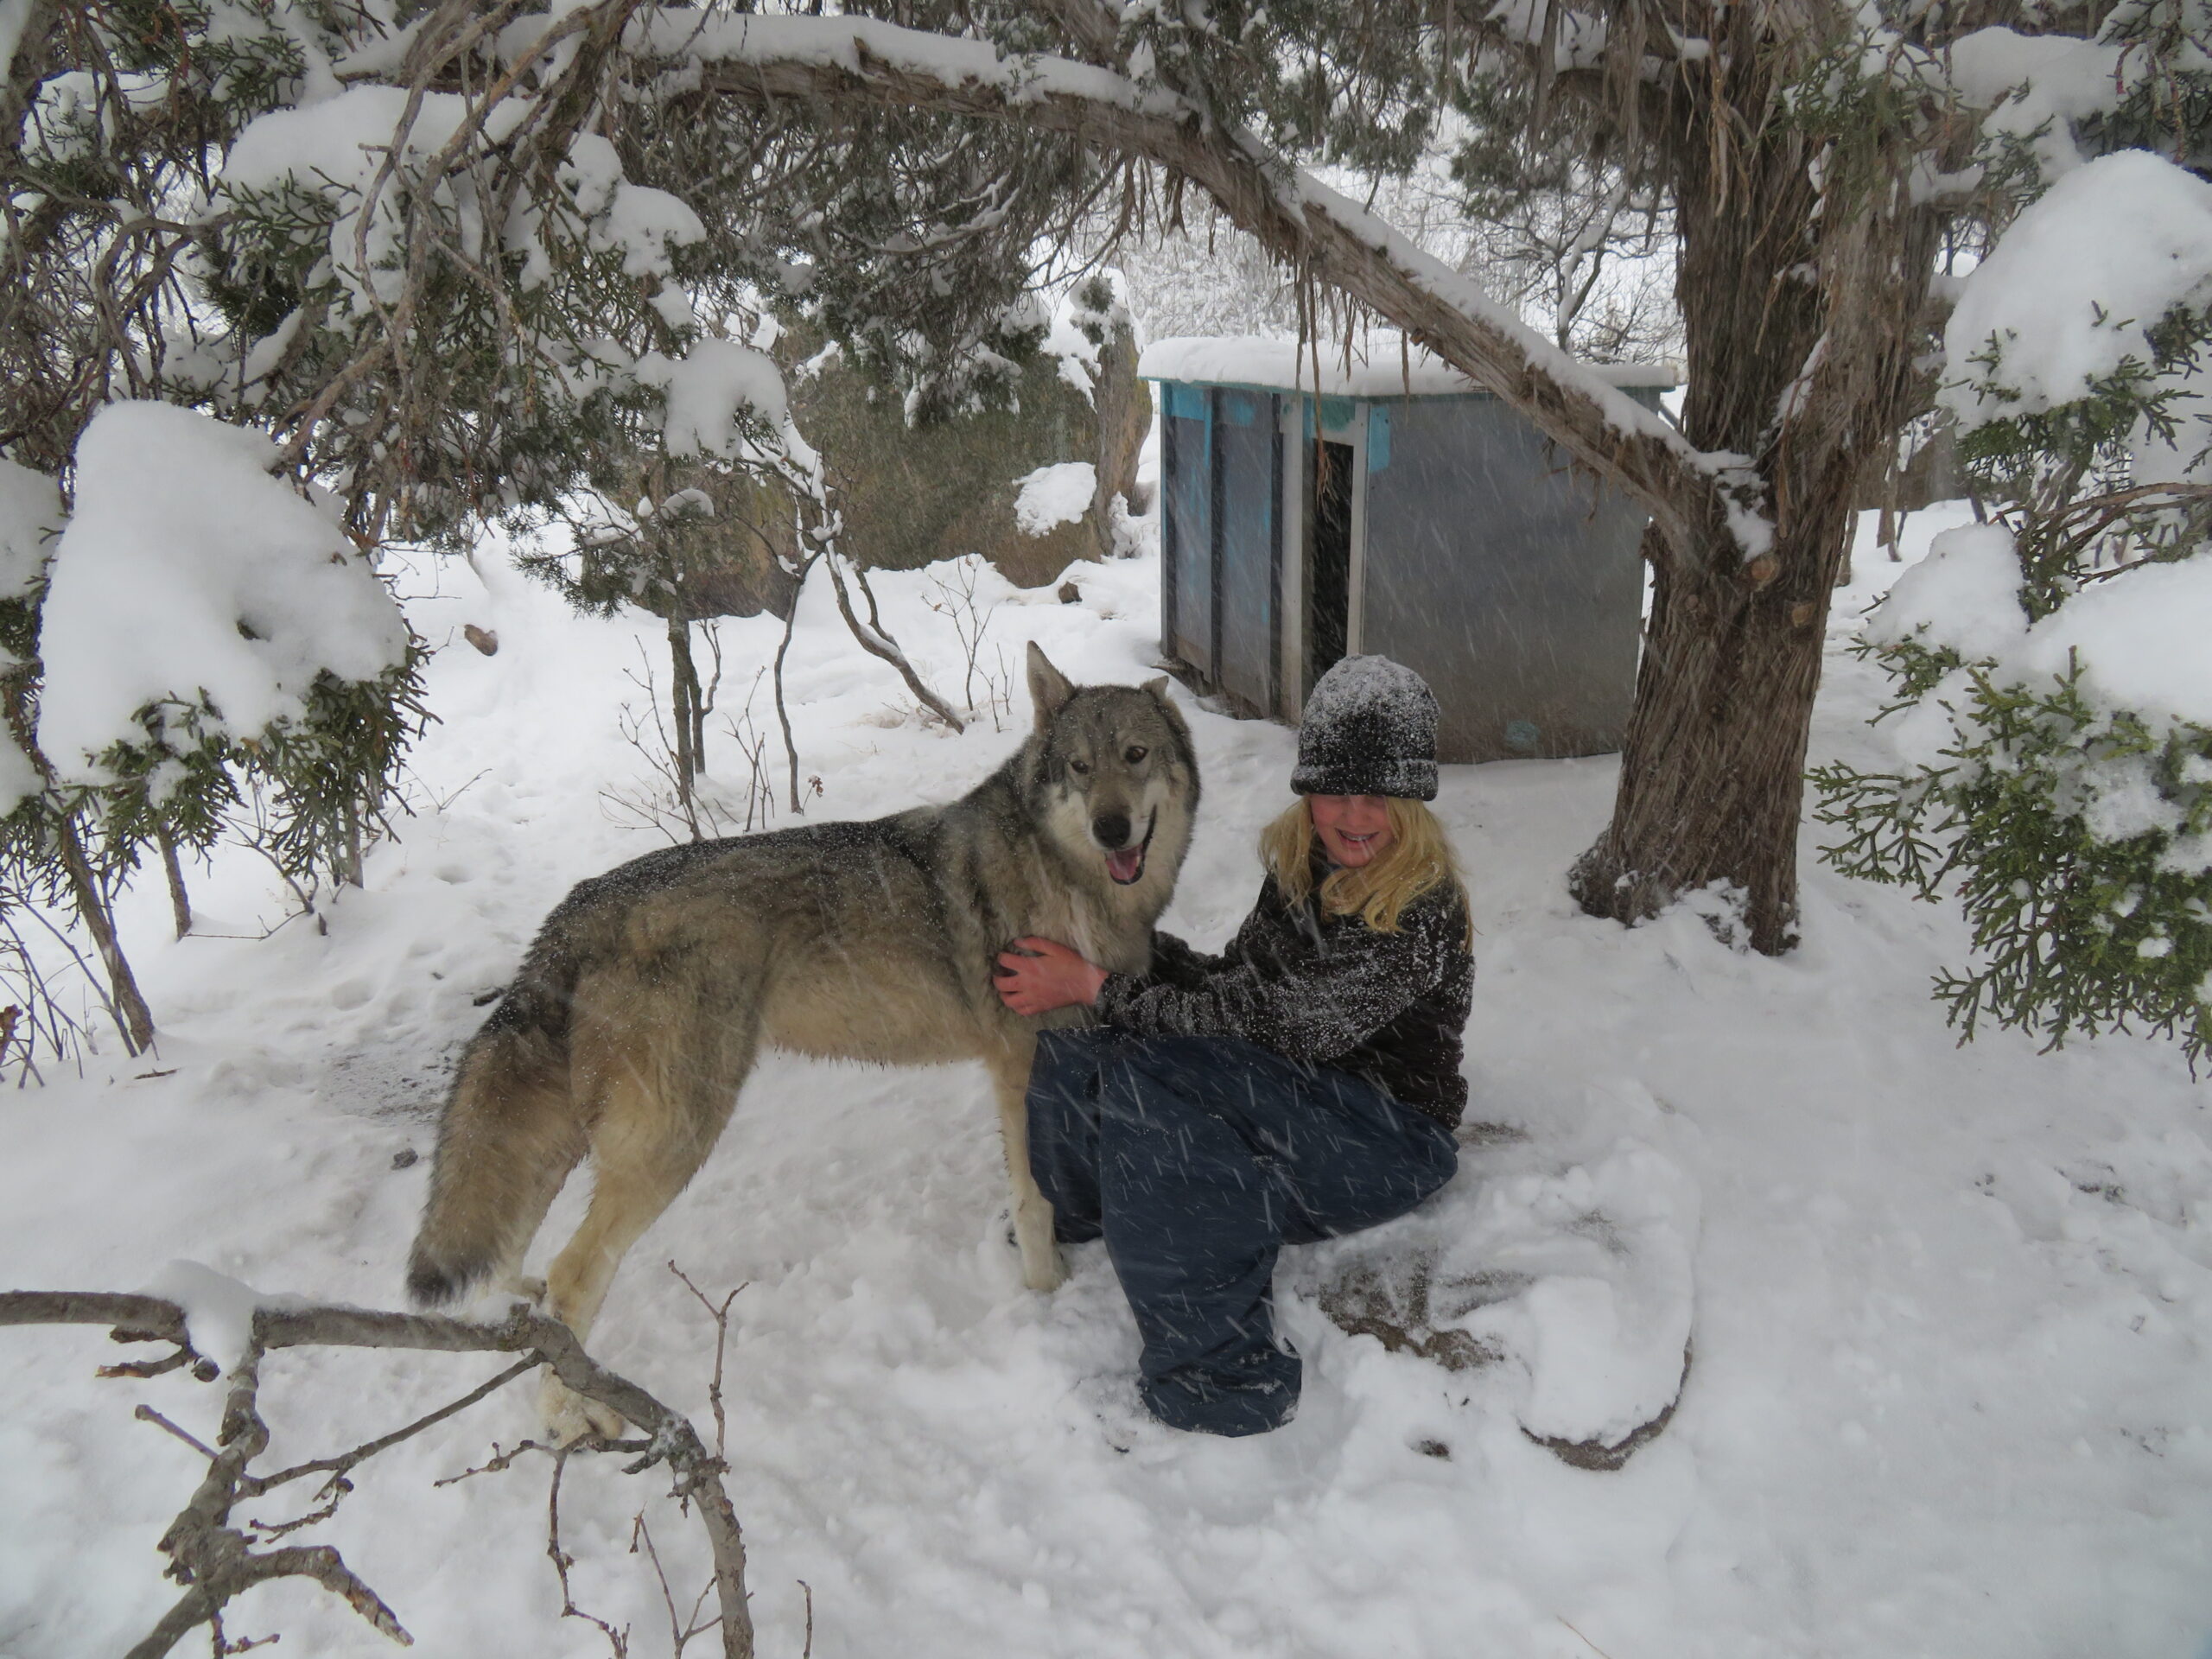 A kid pets a wolf beneath a tree while snow falls